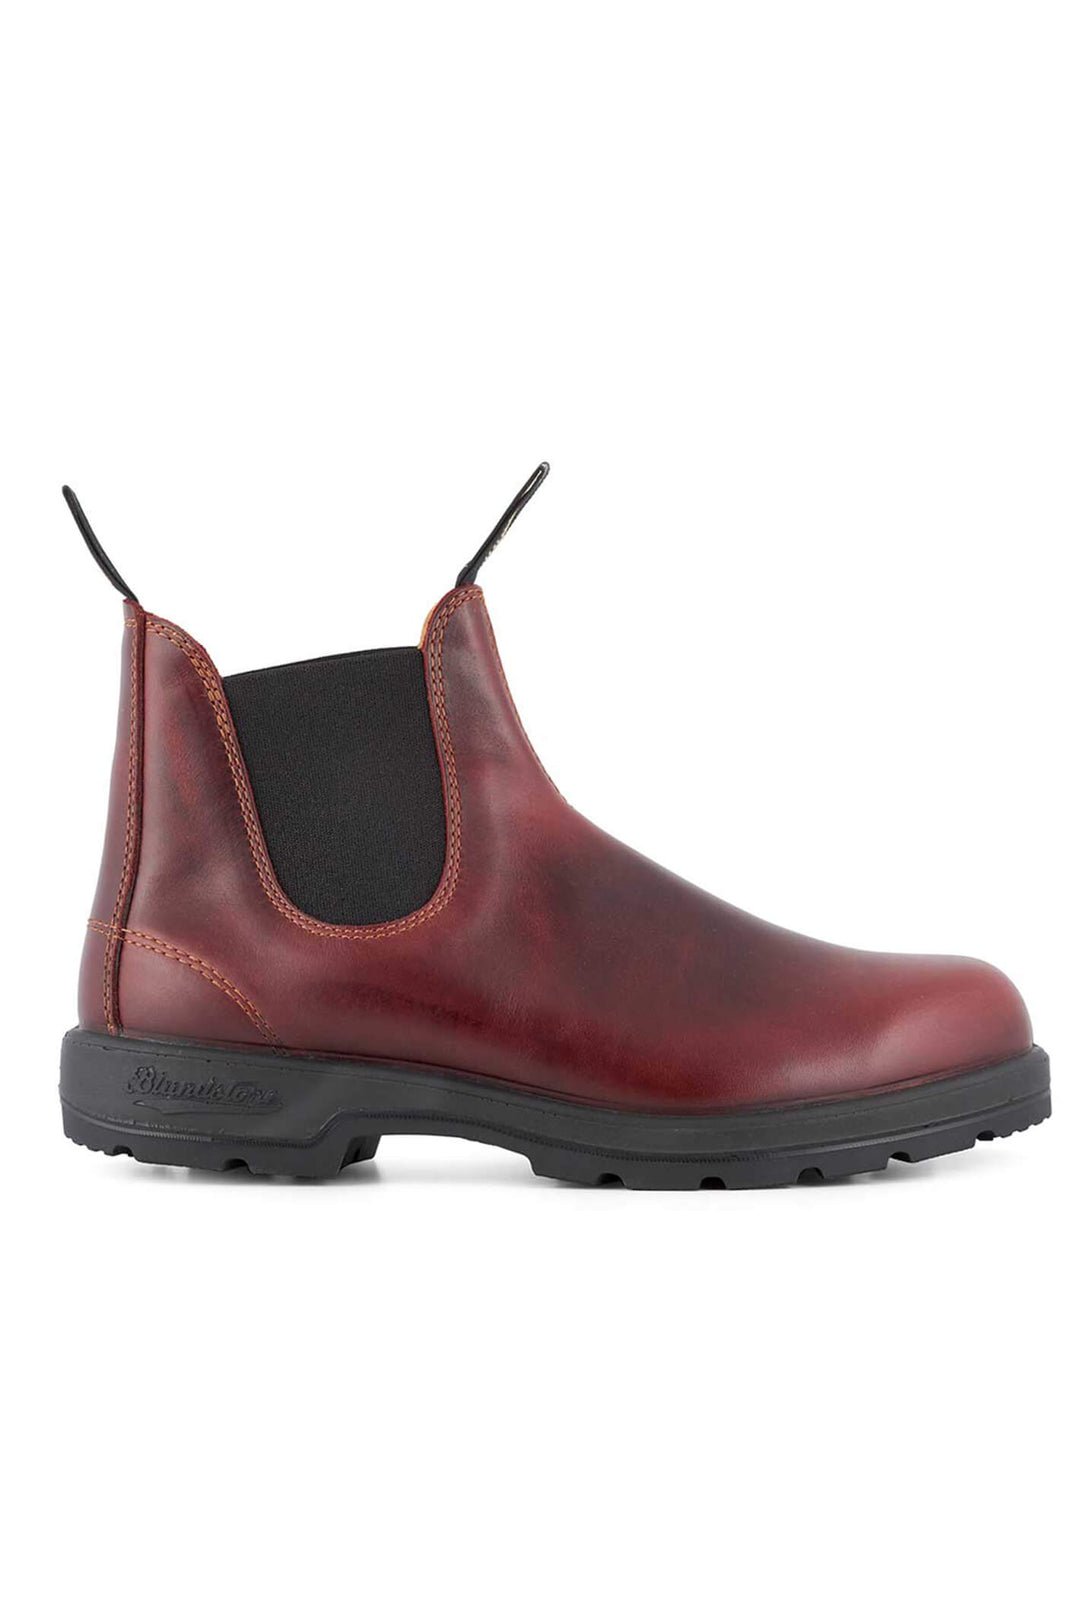 Blundstone 1440 Redwood Leather Ankle Boot - Shirley Allum Boutique